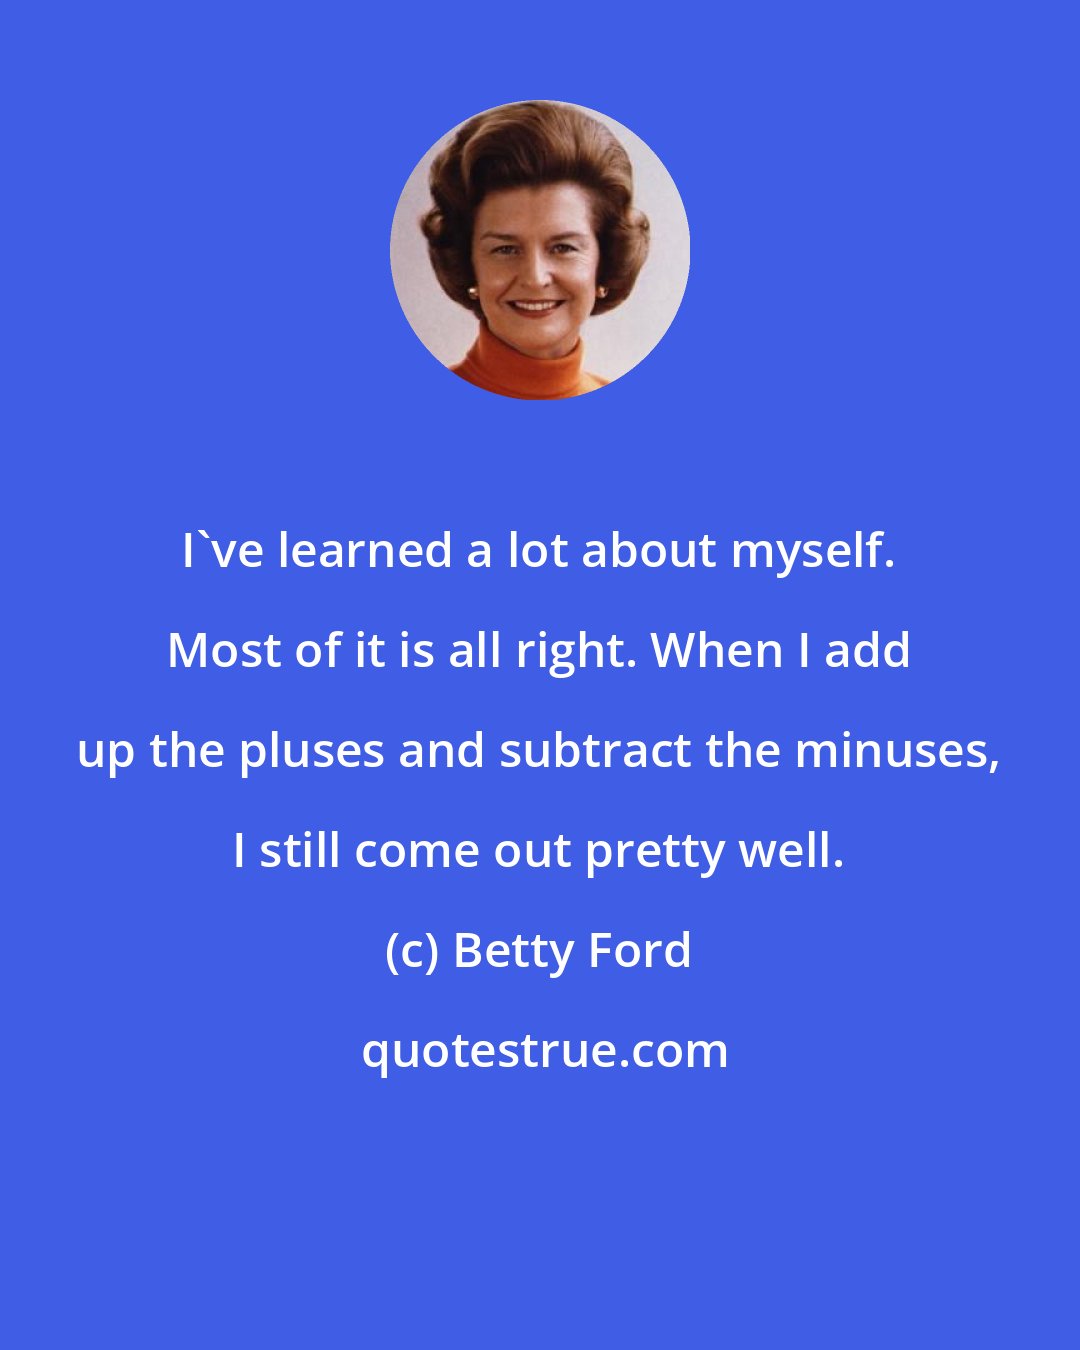 Betty Ford: I've learned a lot about myself. Most of it is all right. When I add up the pluses and subtract the minuses, I still come out pretty well.